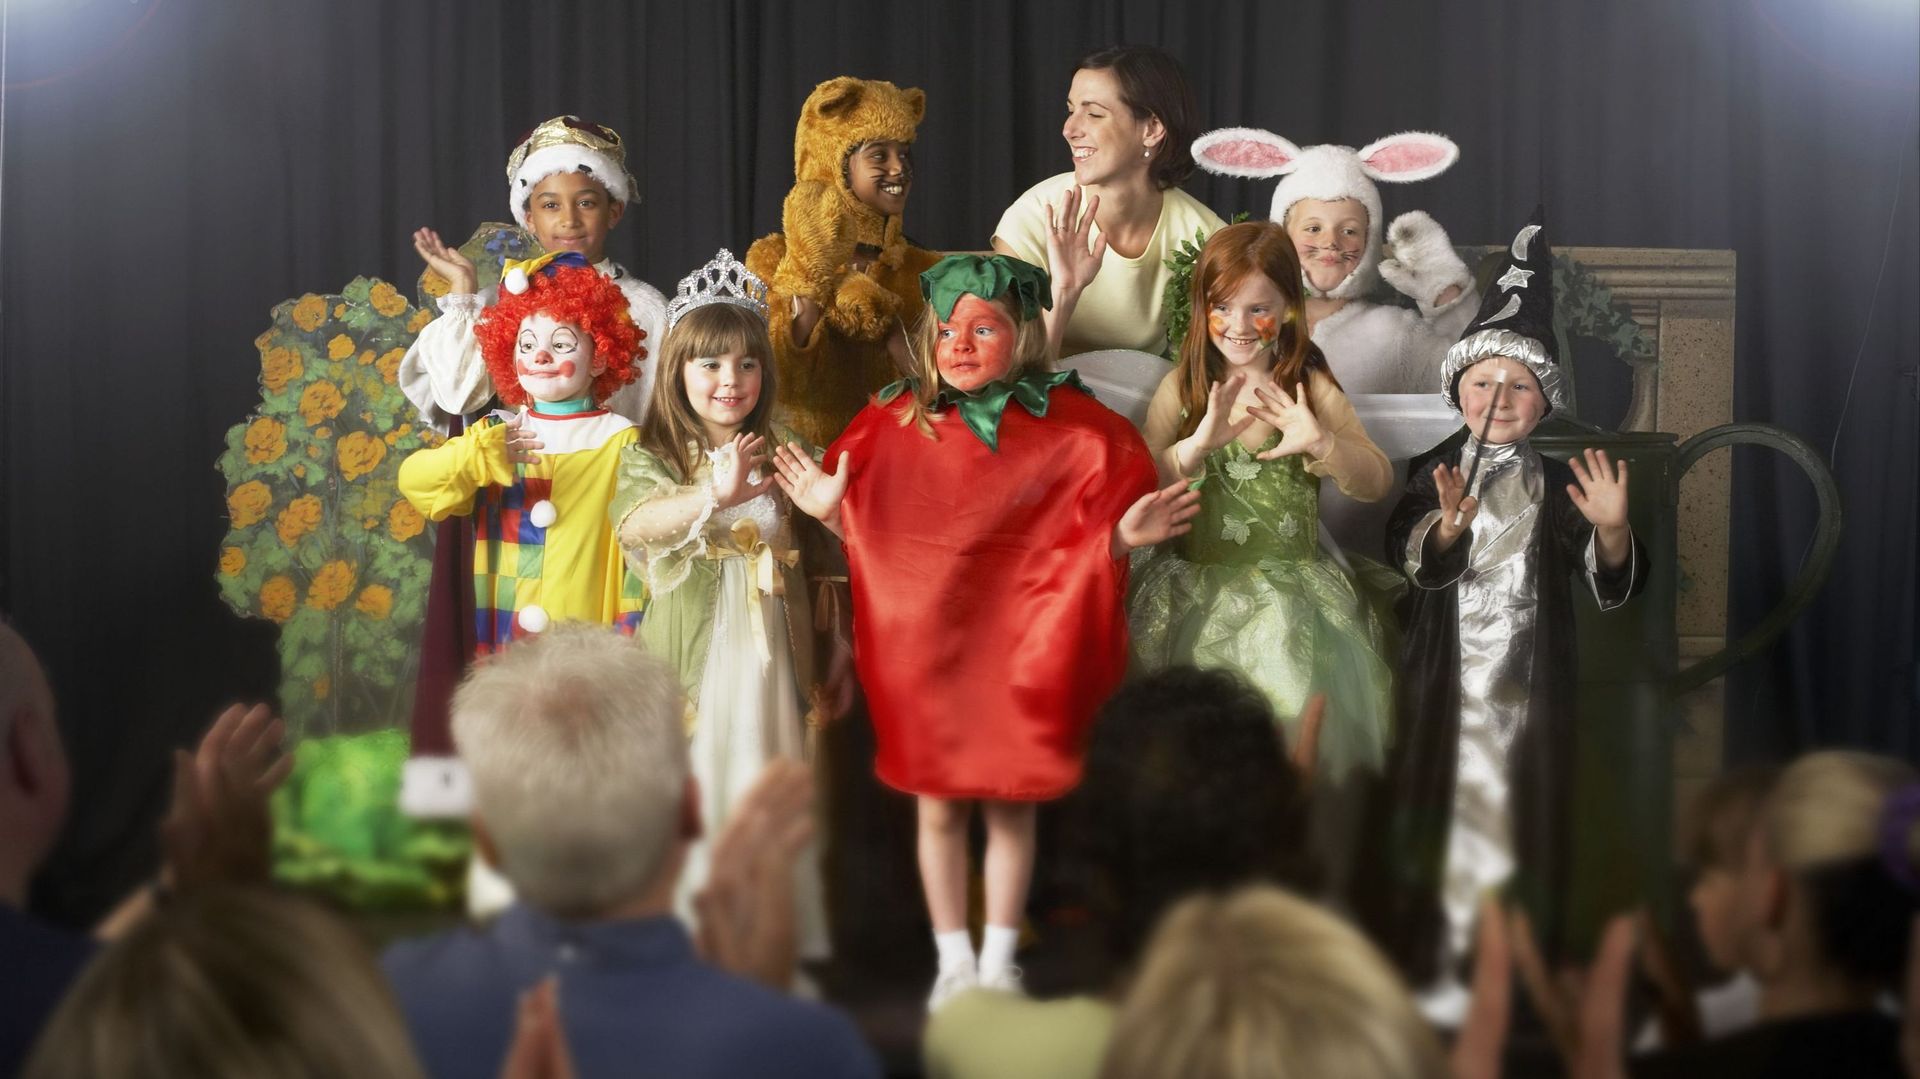 Children (4-9) wearing costumes and teacher waving on stage